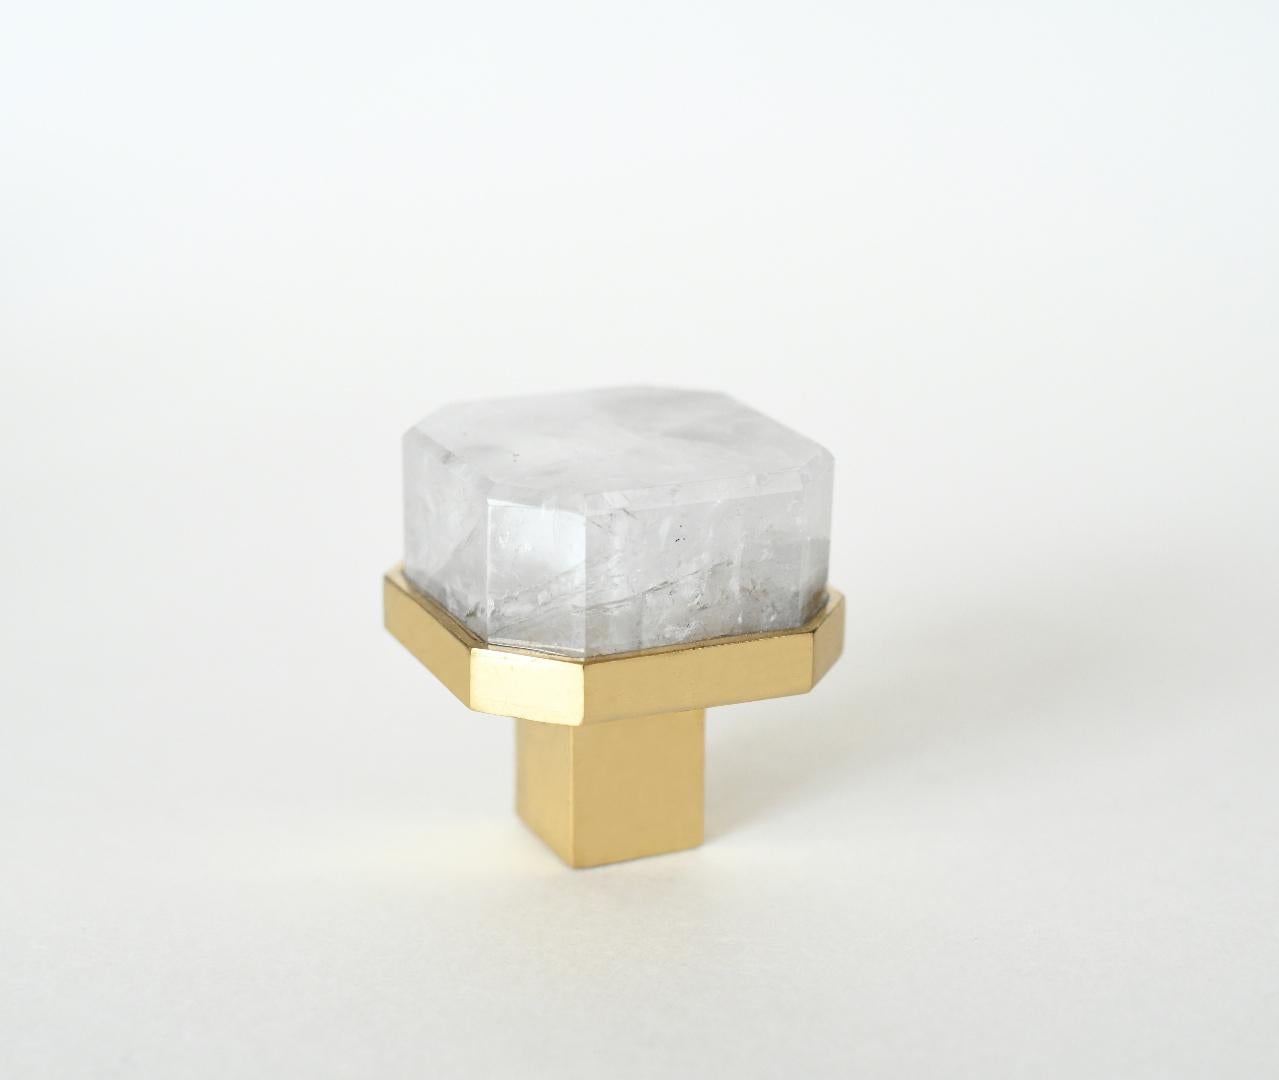 Octagon form rock crystal quartz knob with polished brass base. Created by Phoenix Gallery, NYC.
Custom size and finish upon request.